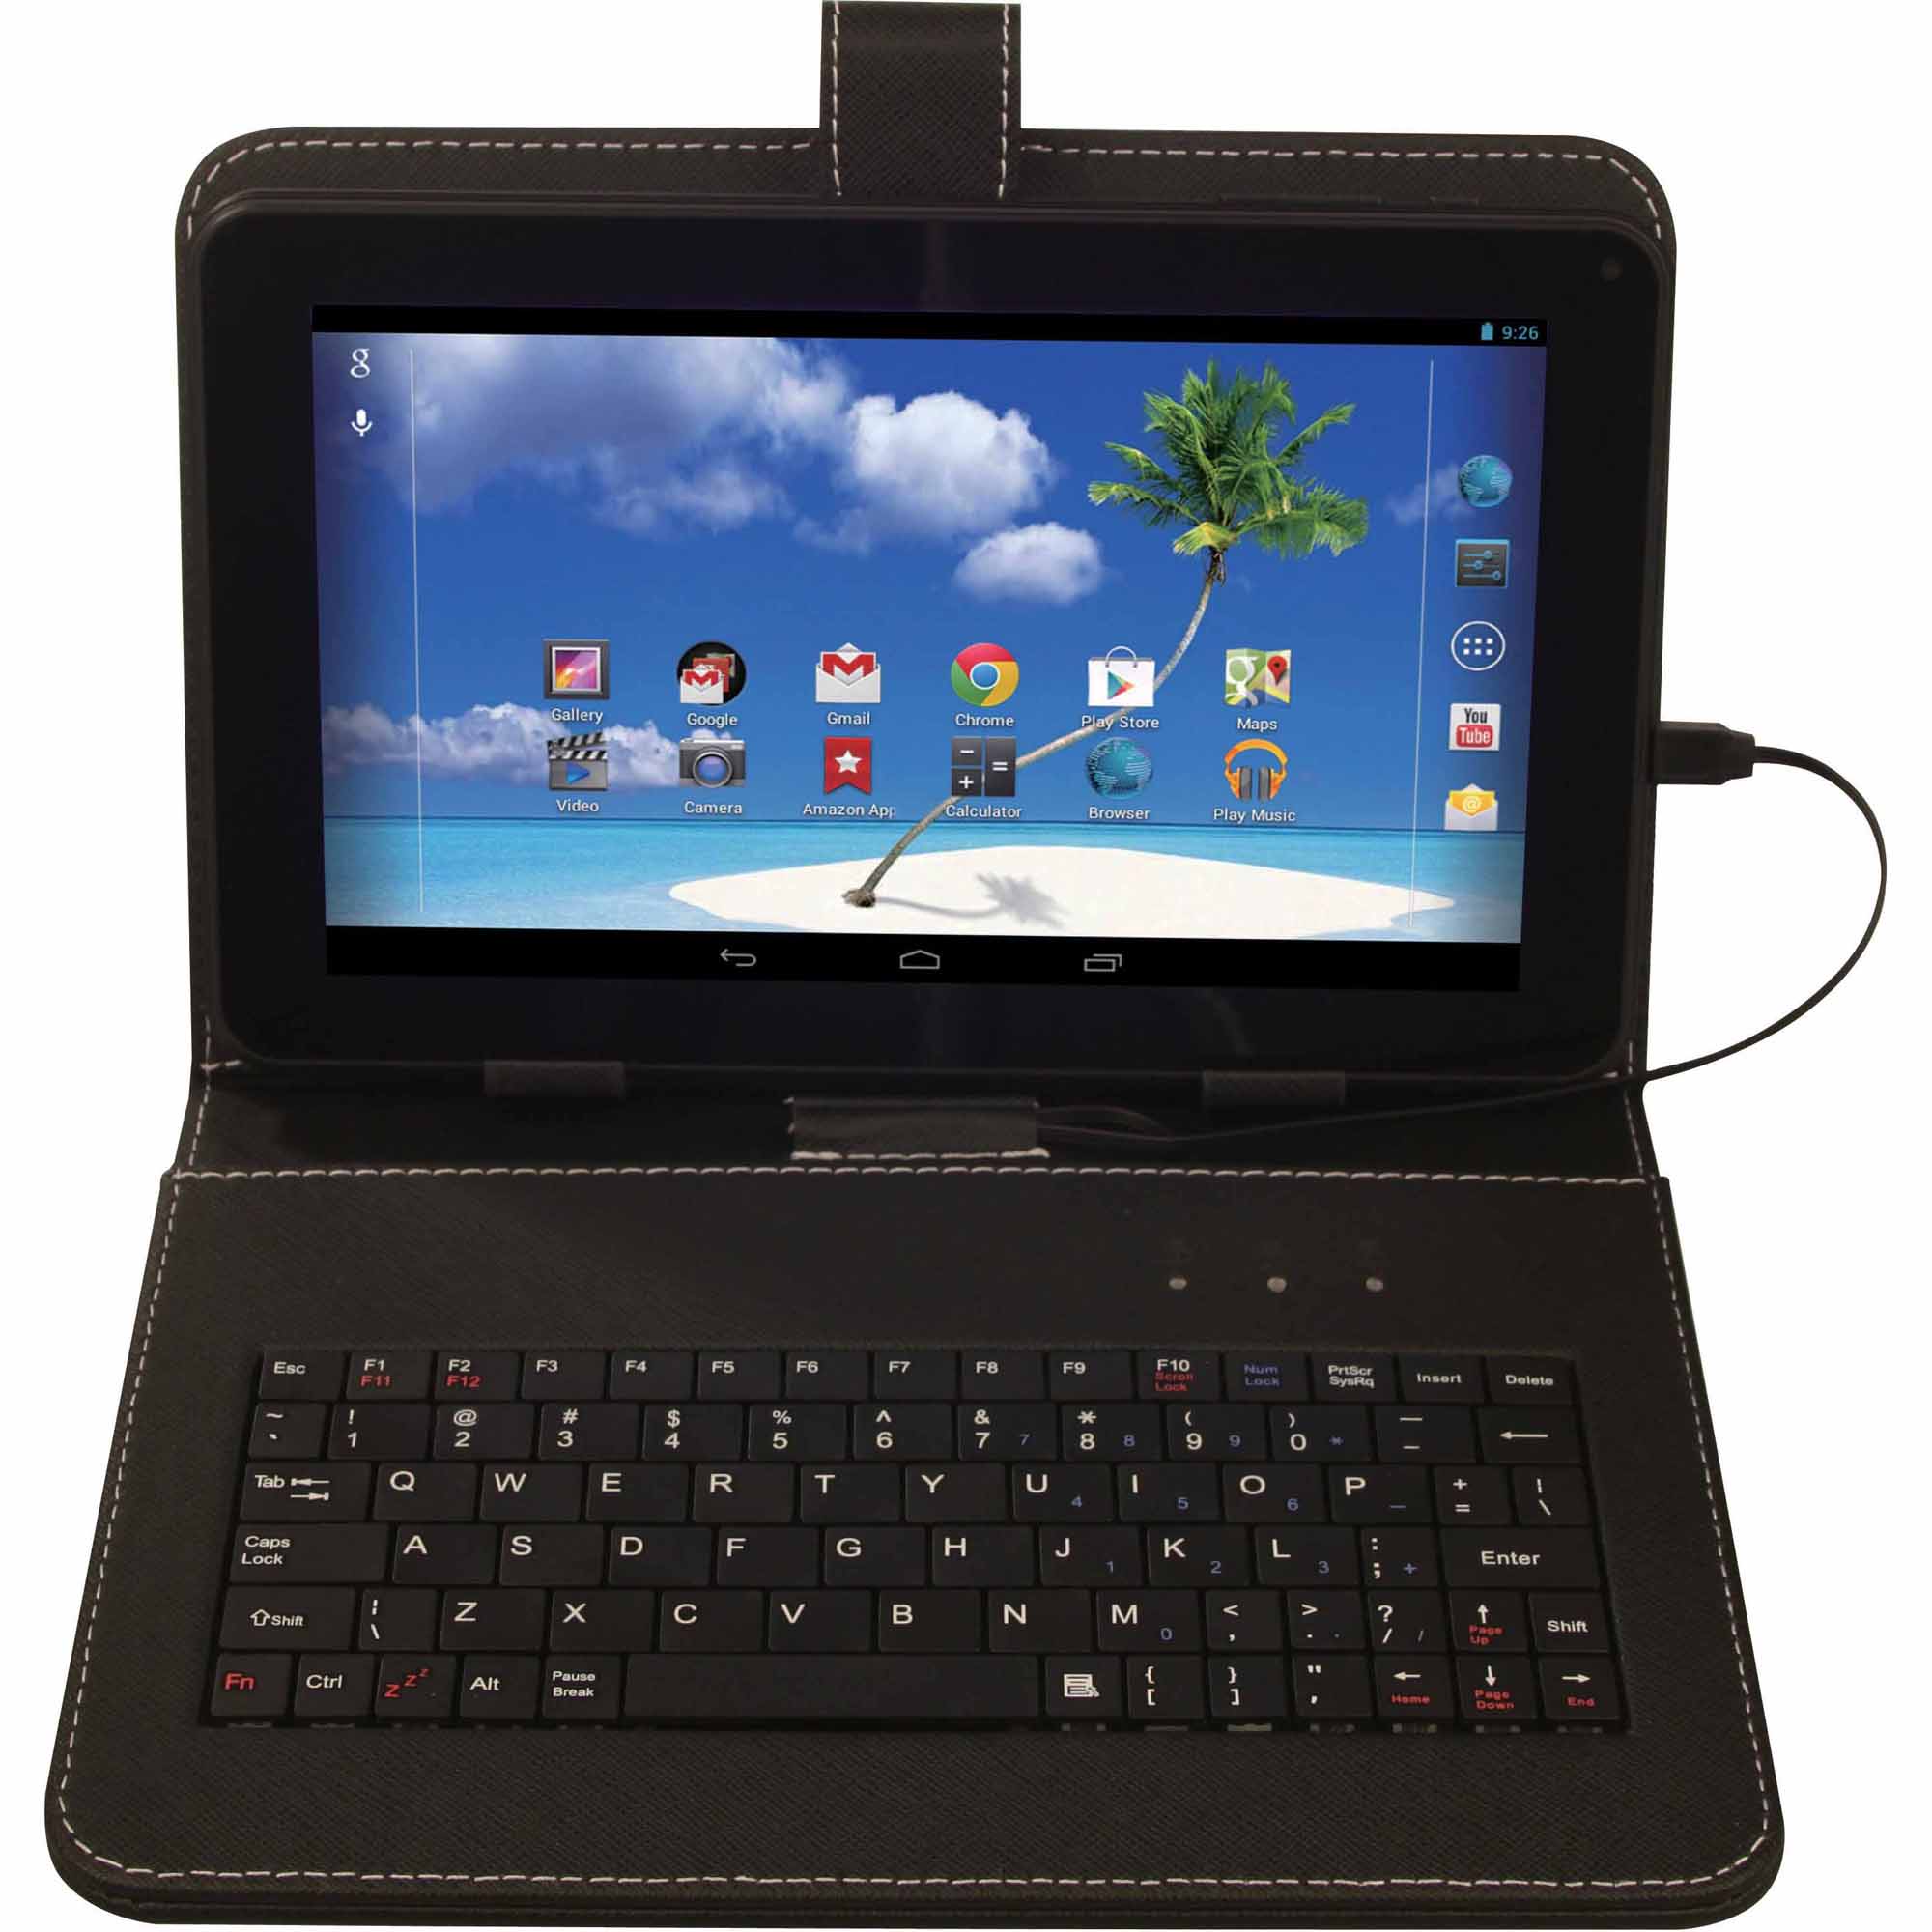 Proscan 9″ Android 4.4 Tablet With Keyboard Case Now Only $39.99!